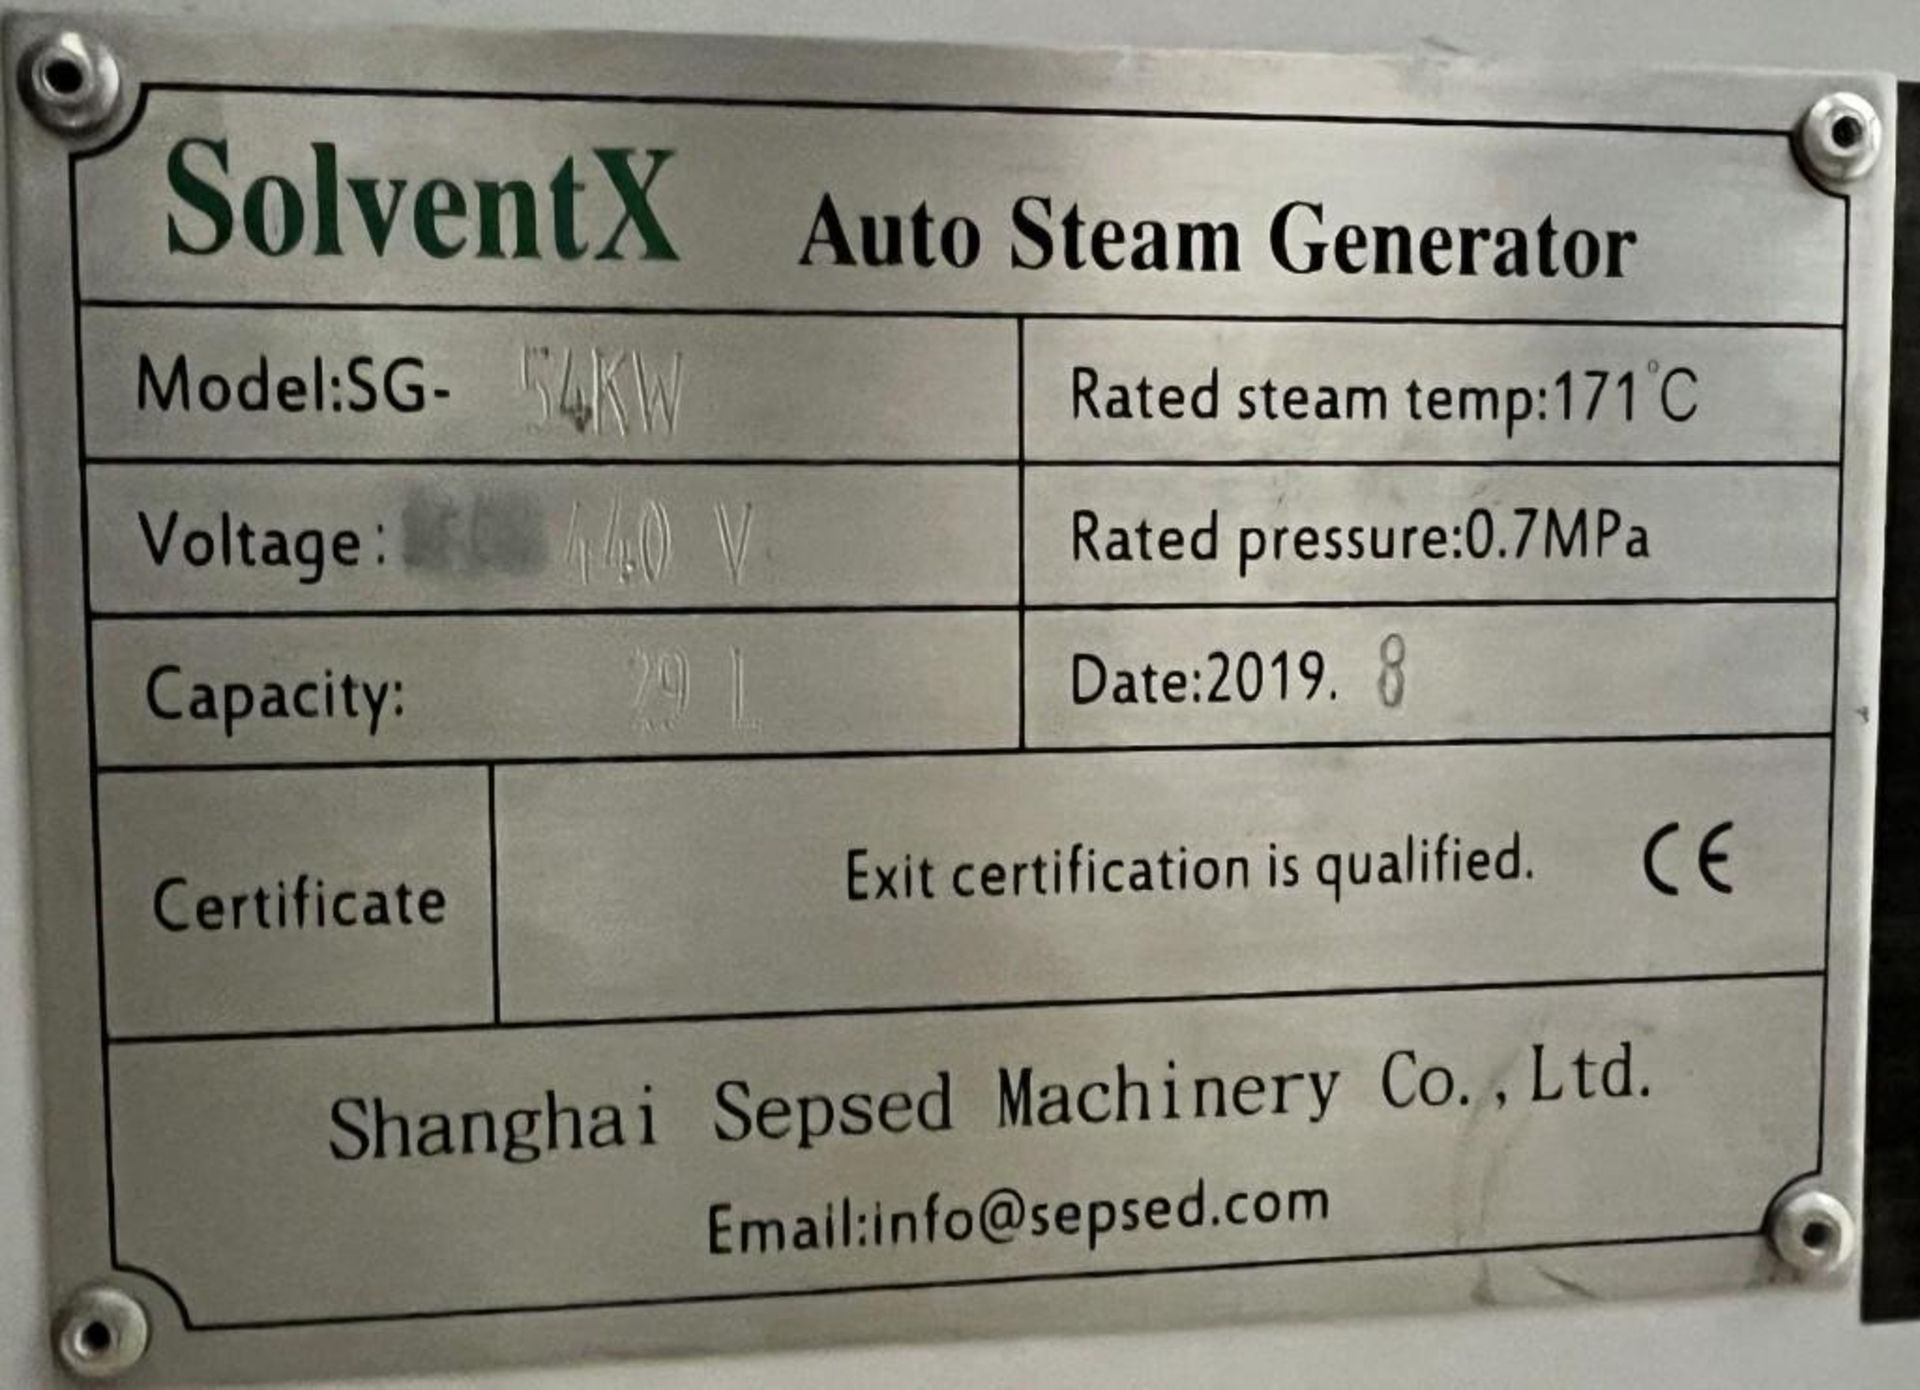 Shanghai Sepsed Machinery Solvent X Auto Steam Generator, Model SG-54KW, Built 08/2019. ***SEE LOT# - Image 9 of 10